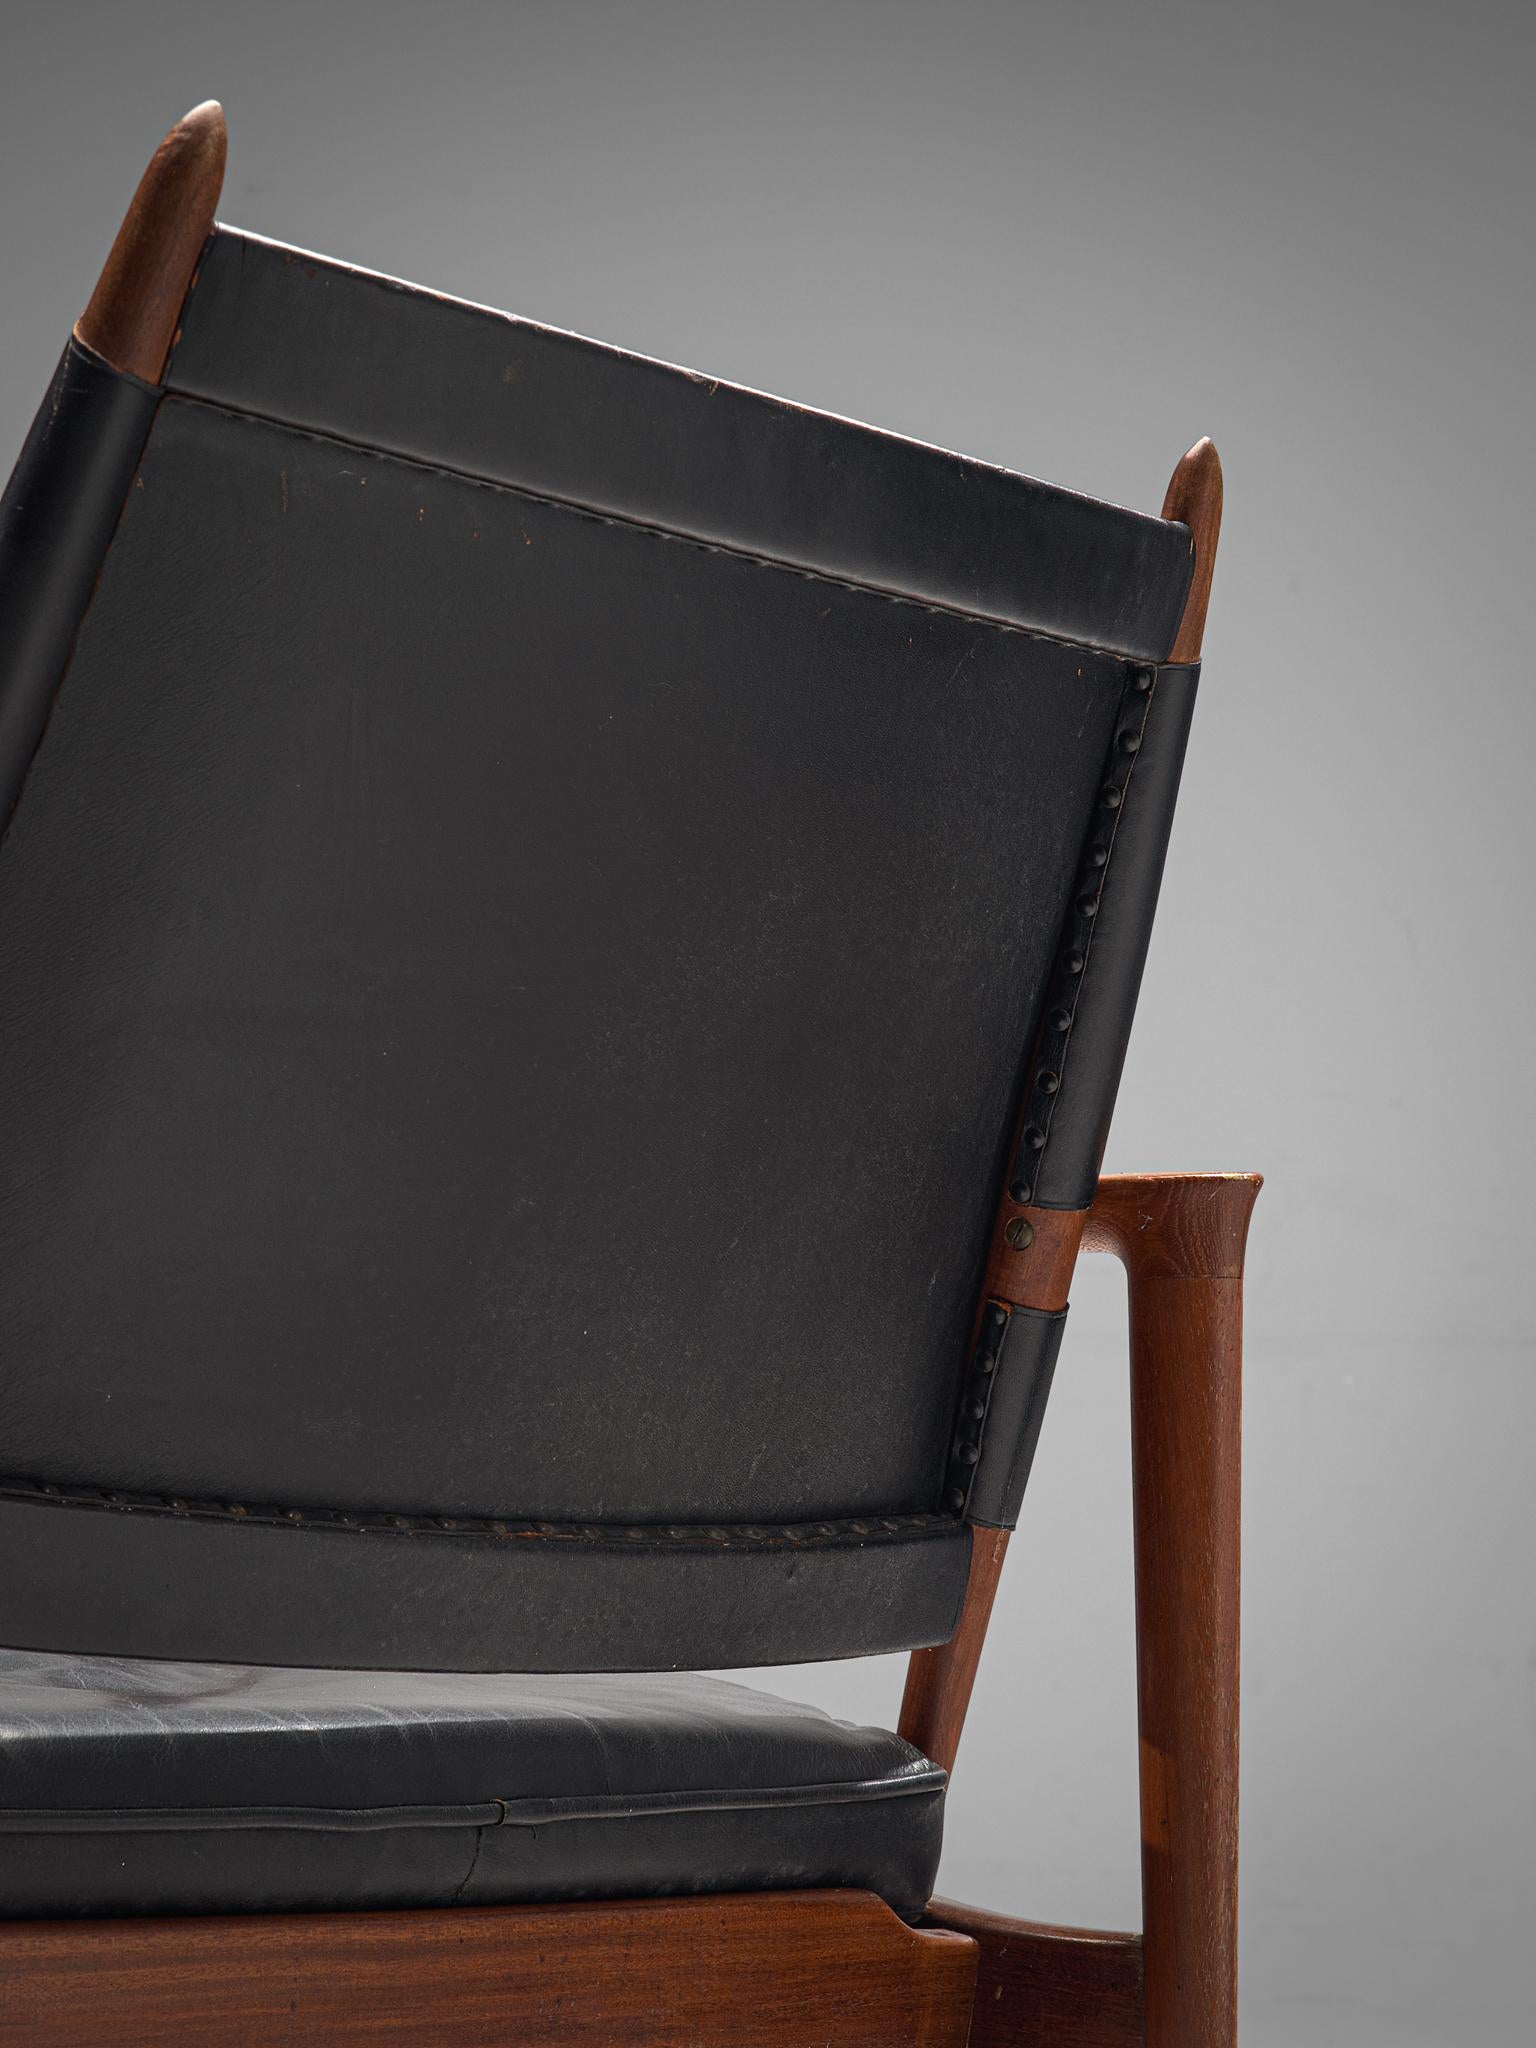 Mid-20th Century Torbjørn Afdal Pair of Armchairs in Teak and Black Leather, Norway, 1960s